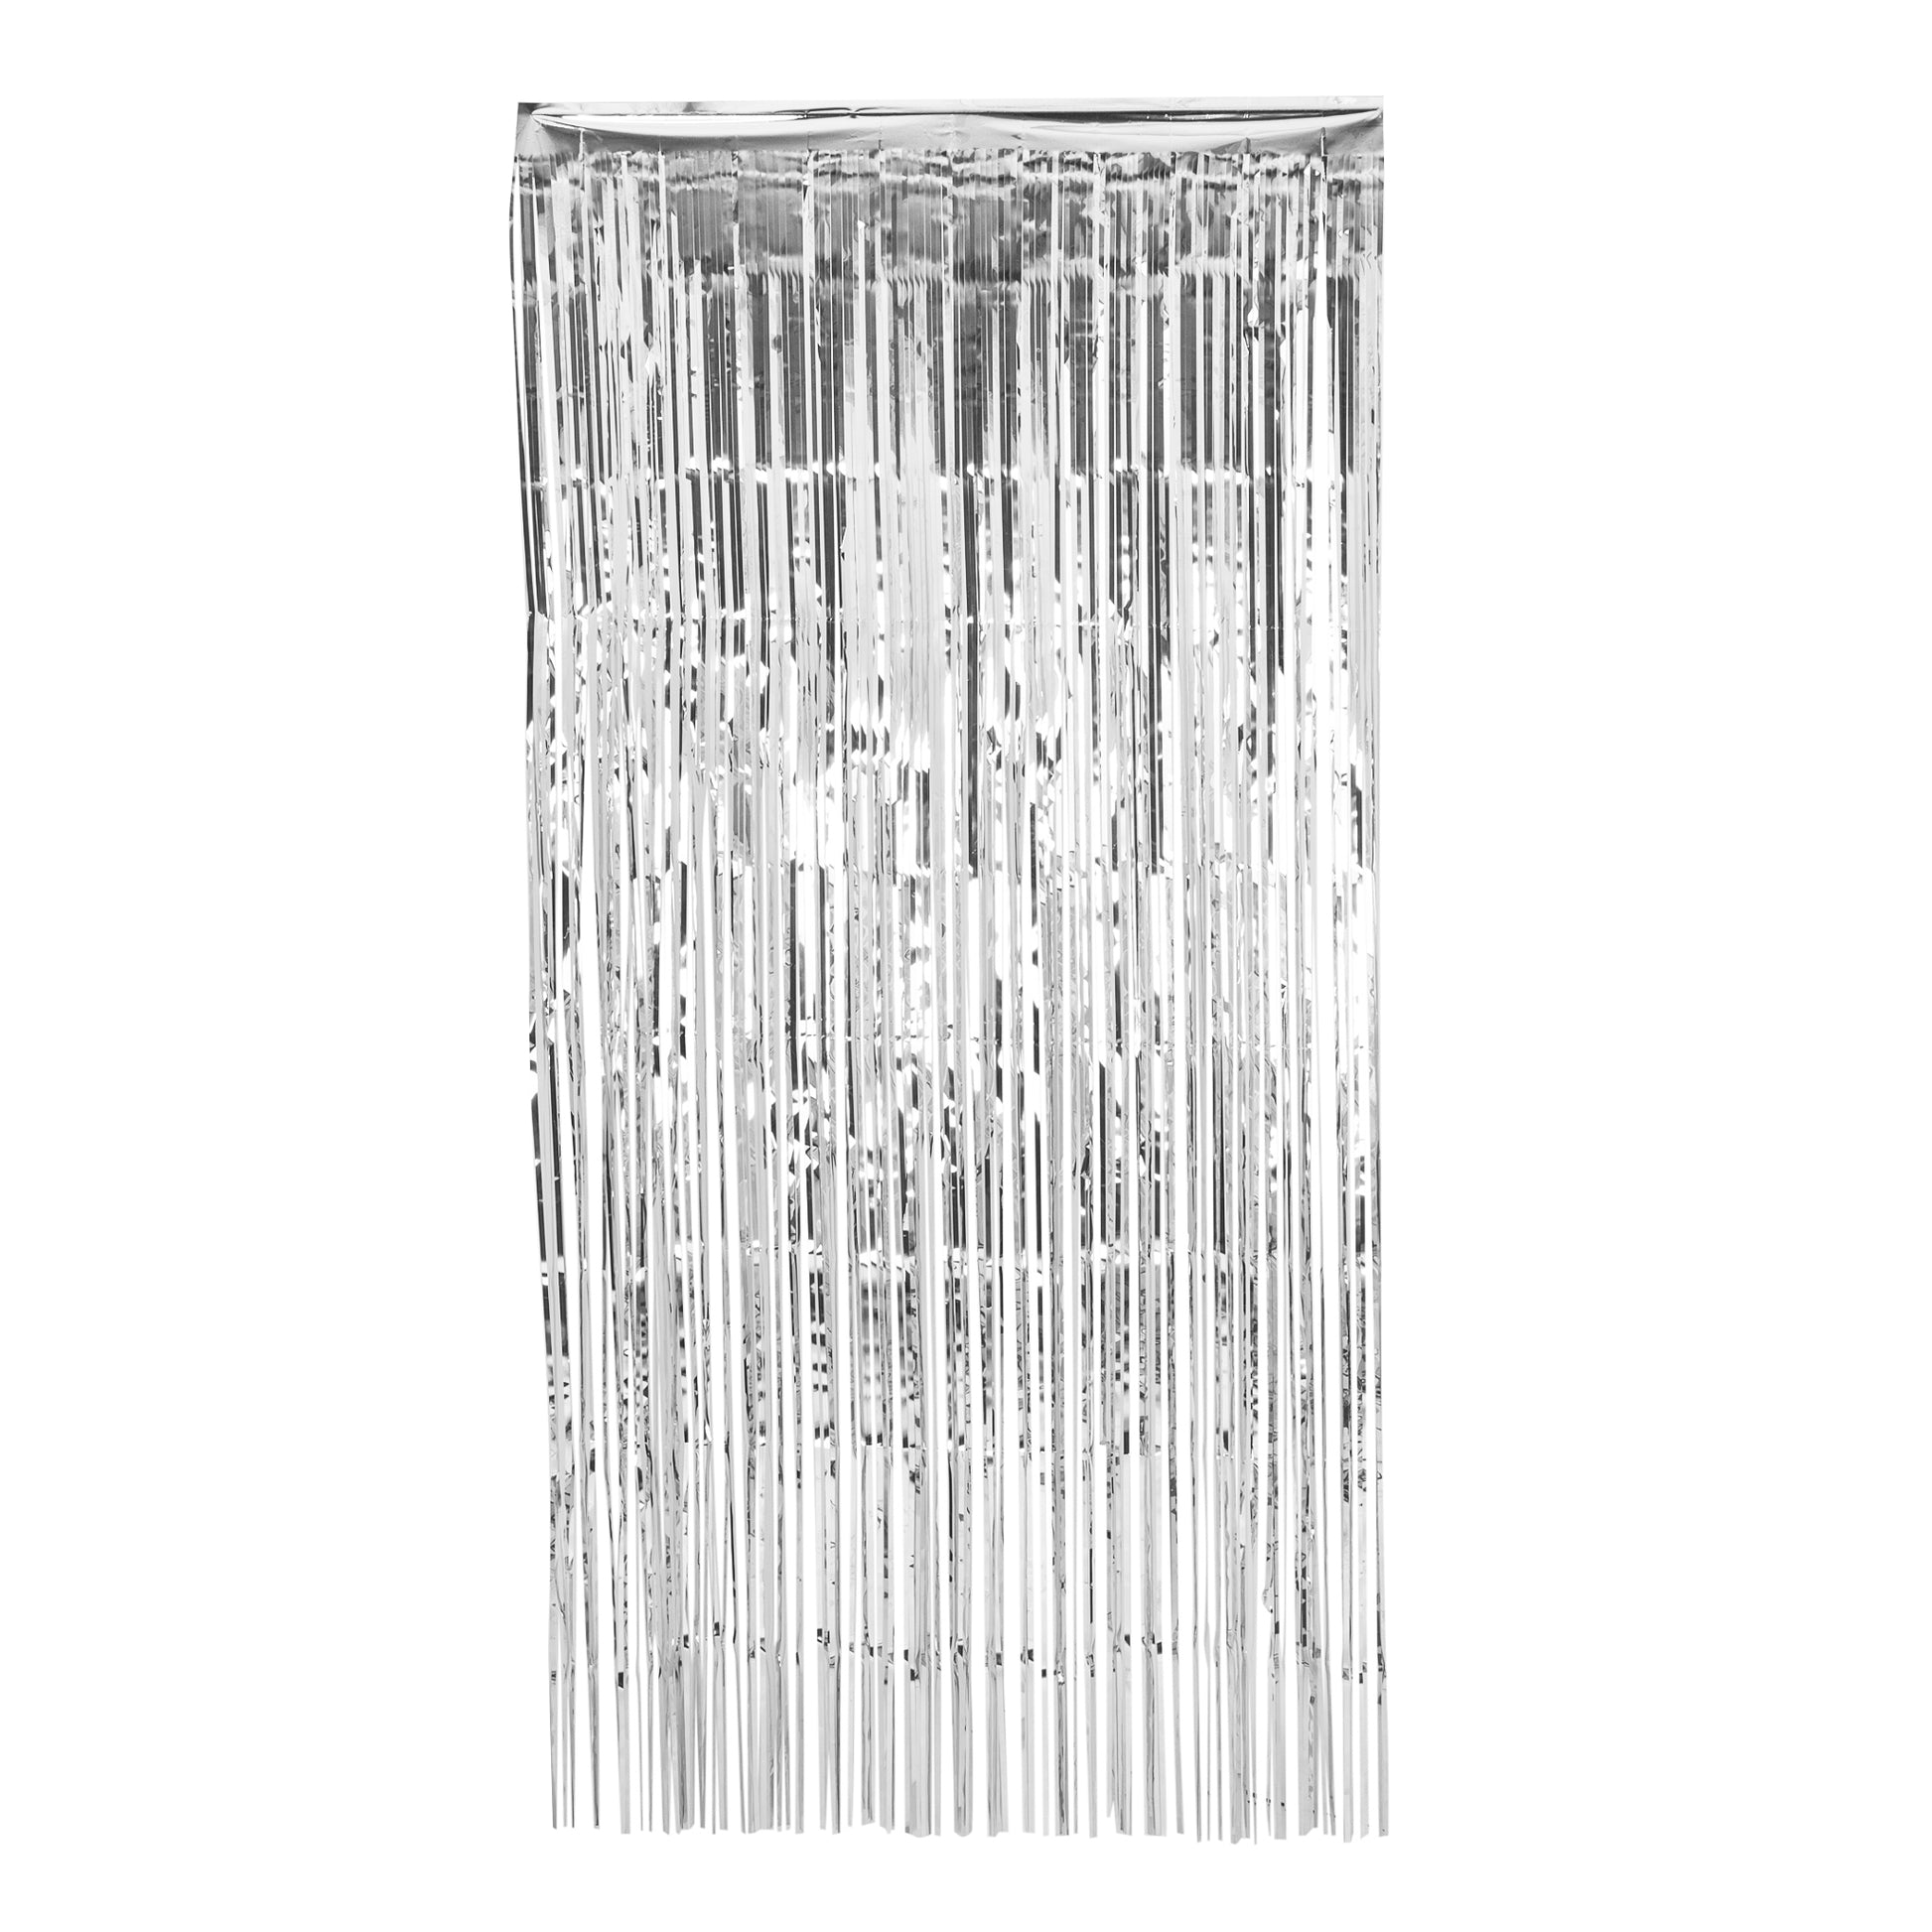 Silver Fringe Curtain Backdrop 2mx1m, Silver Streamer Curtains